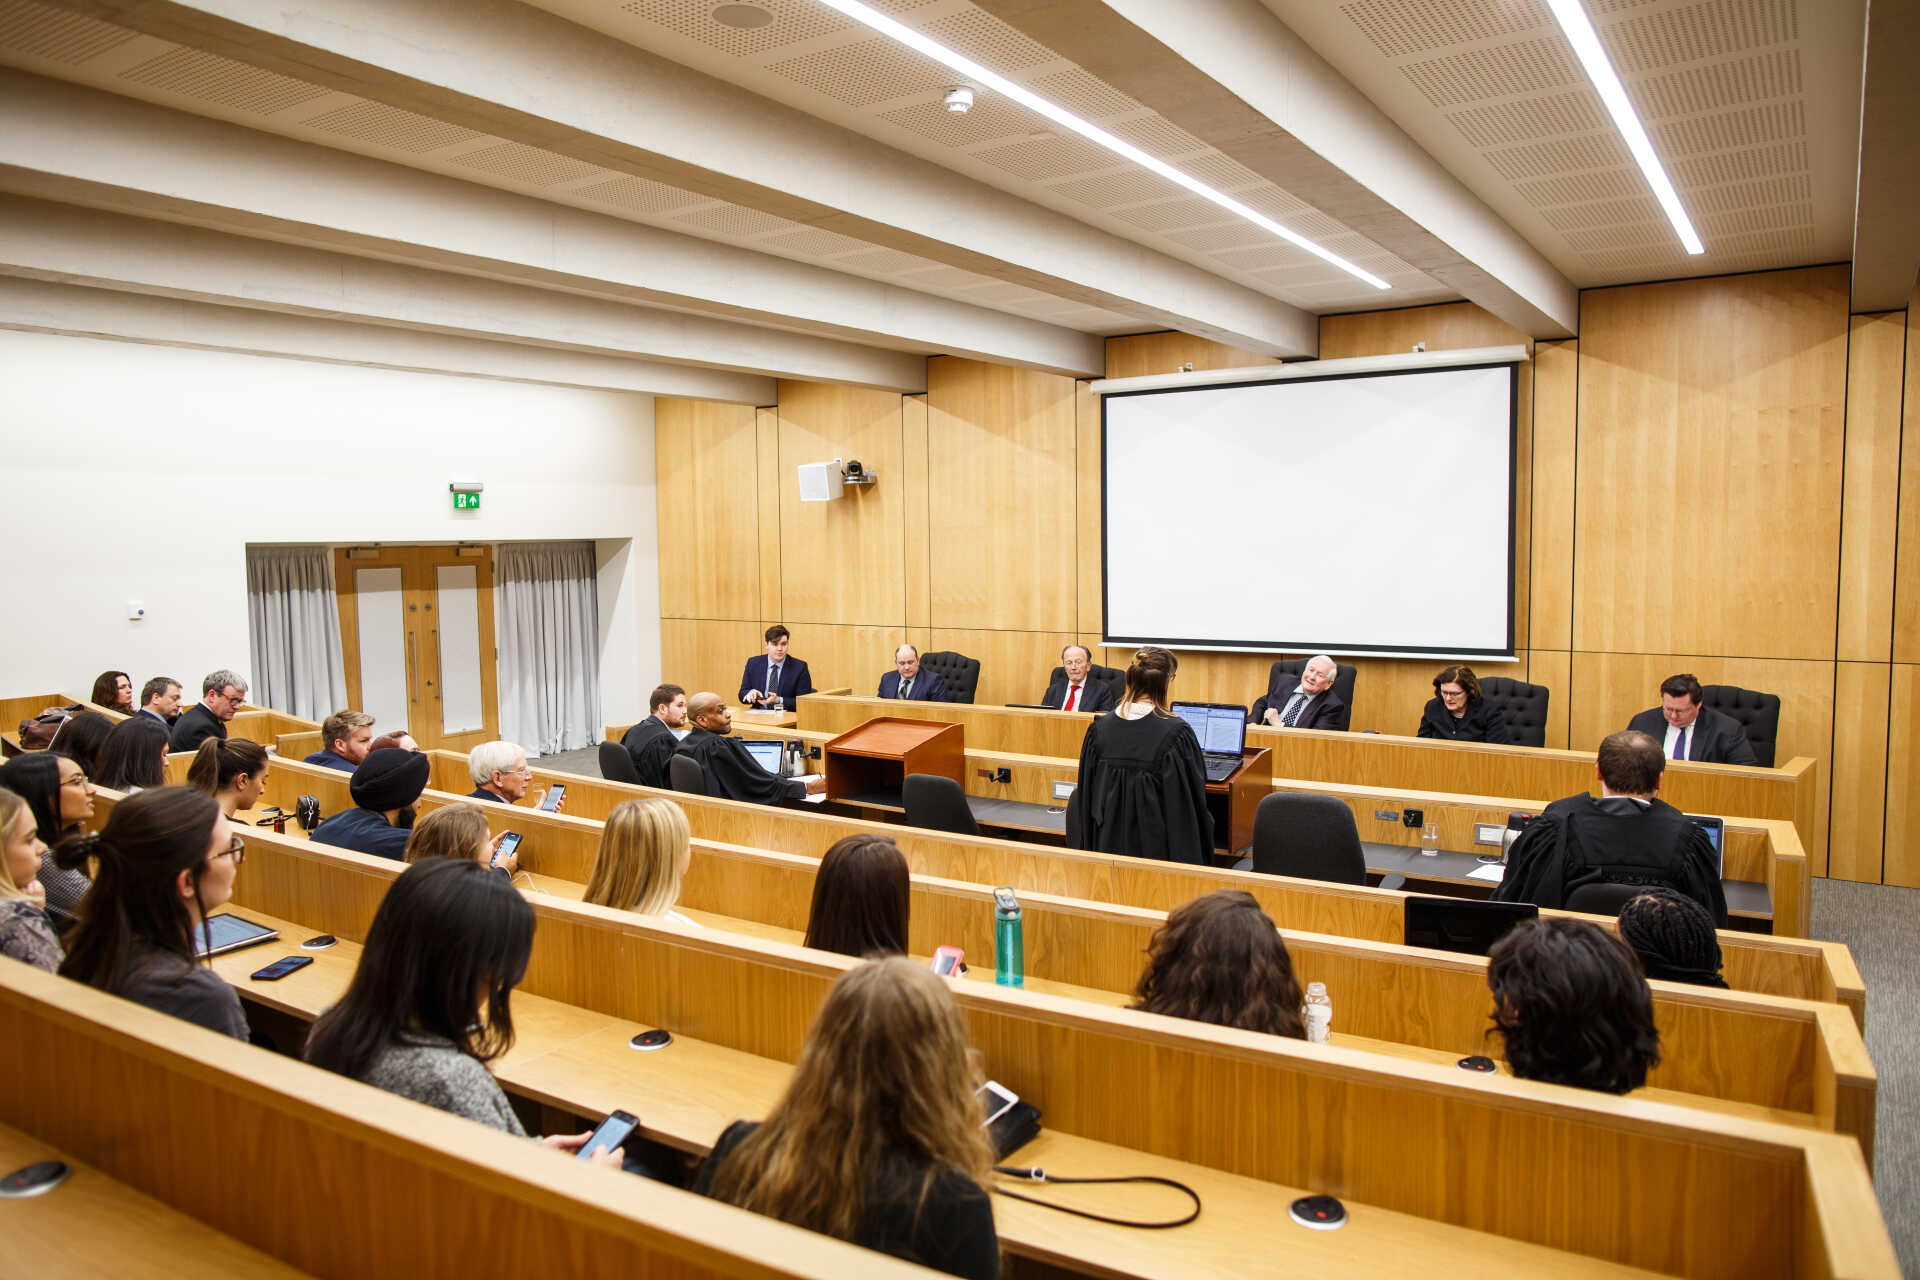 Students participate in a mooting session in our replica courtroom